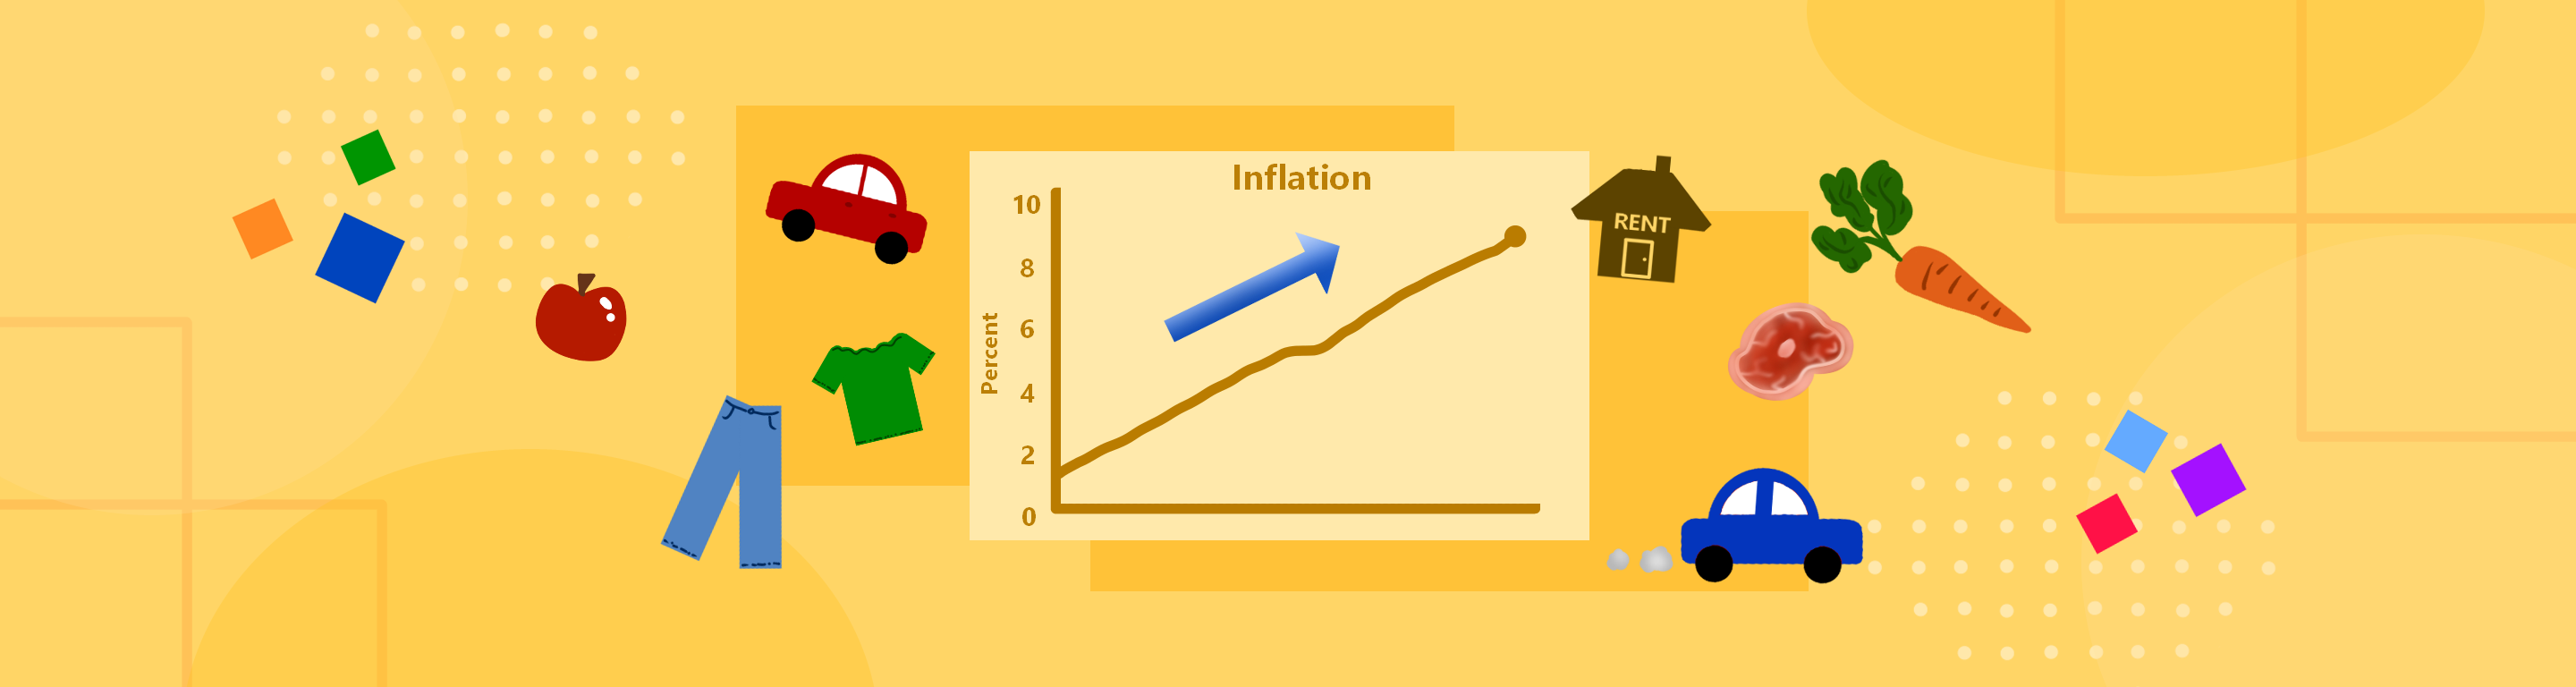 Graph of inflation rate rising surrounded by cars, rent, food, and clothes